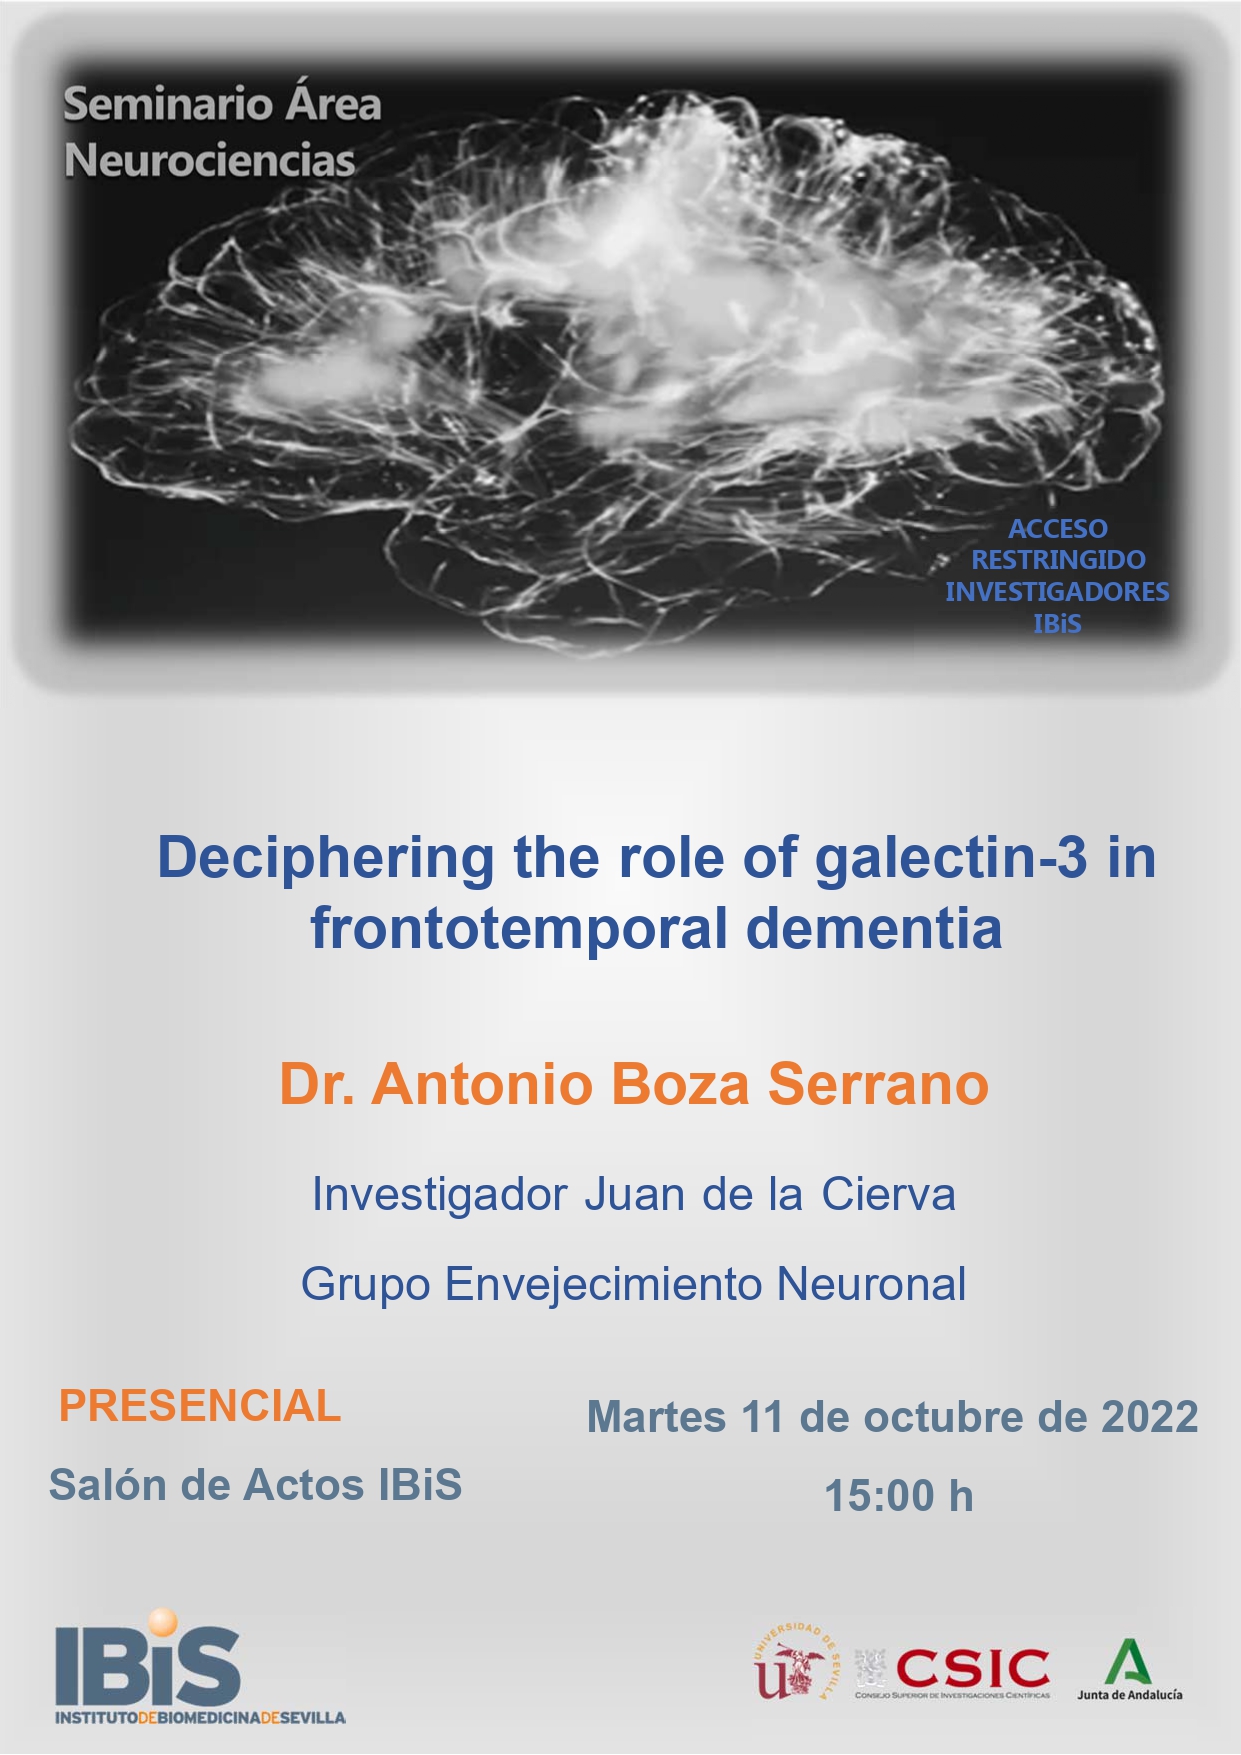 Poster: Deciphering the role of galectin-3 in frontotemporal dementia